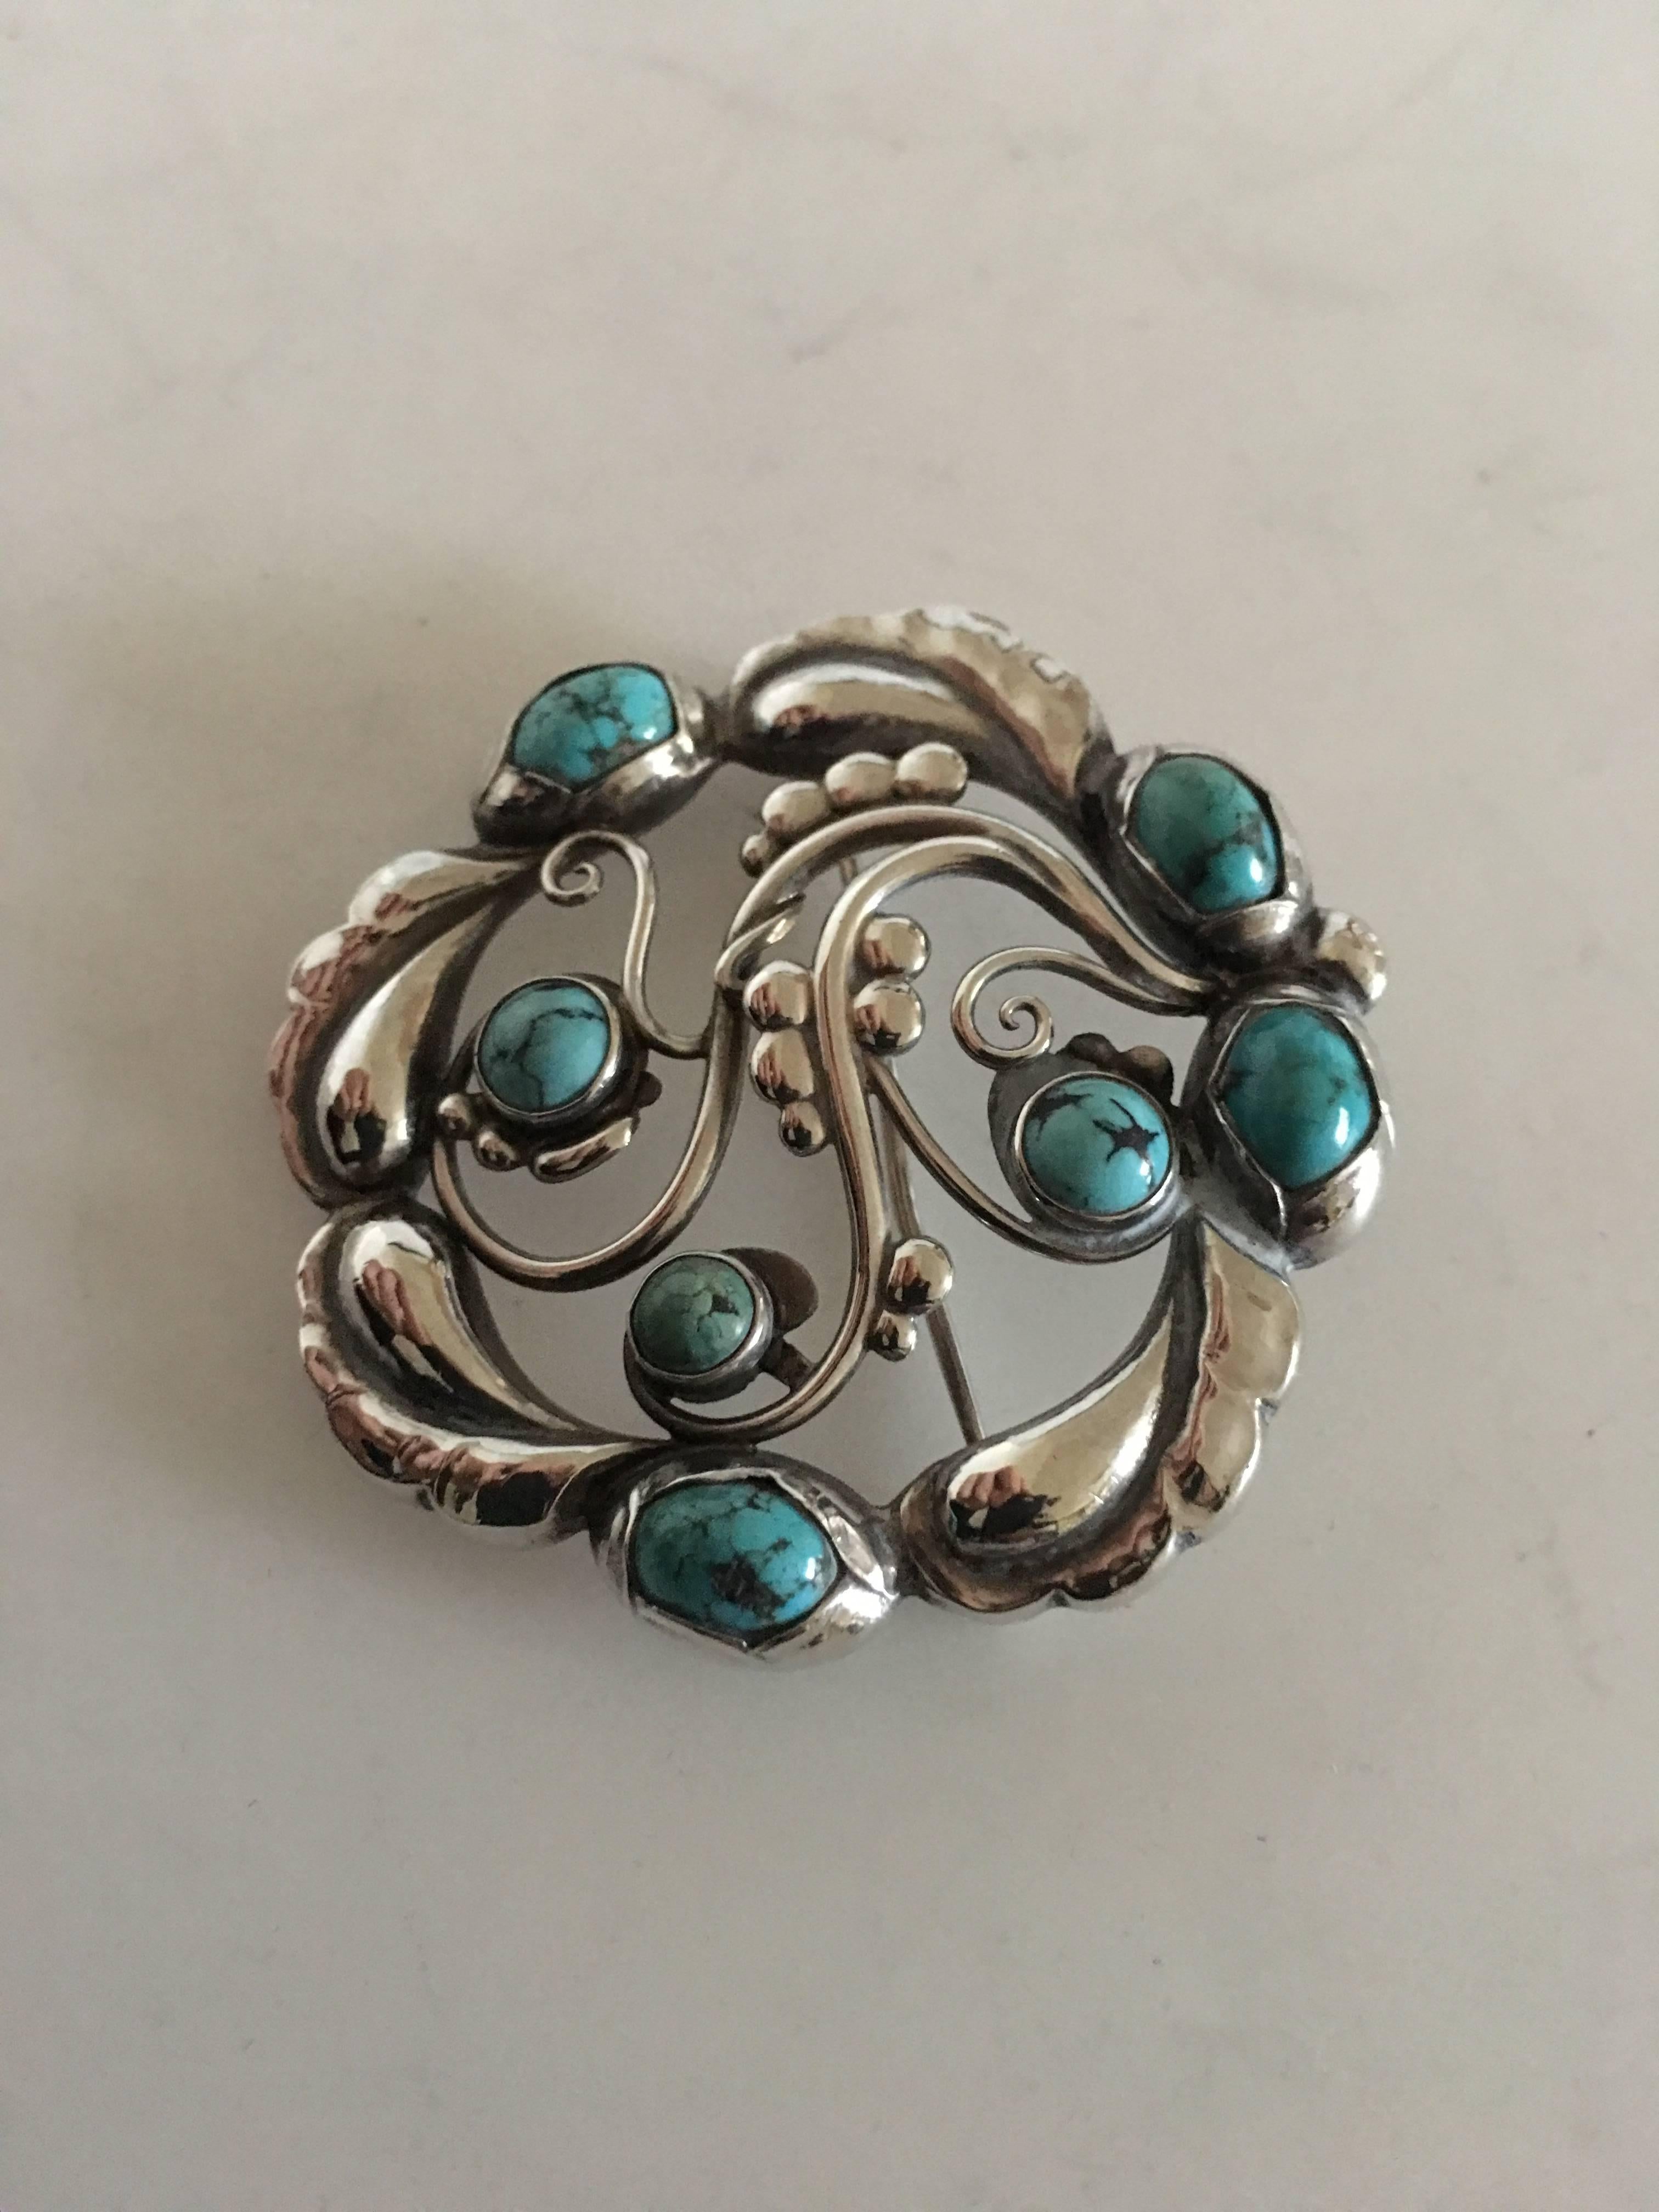 Georg Jensen Sterling Silver Brooch No. 159 ornamented with Turquoise. 4.6 cm diameter (1 13/16